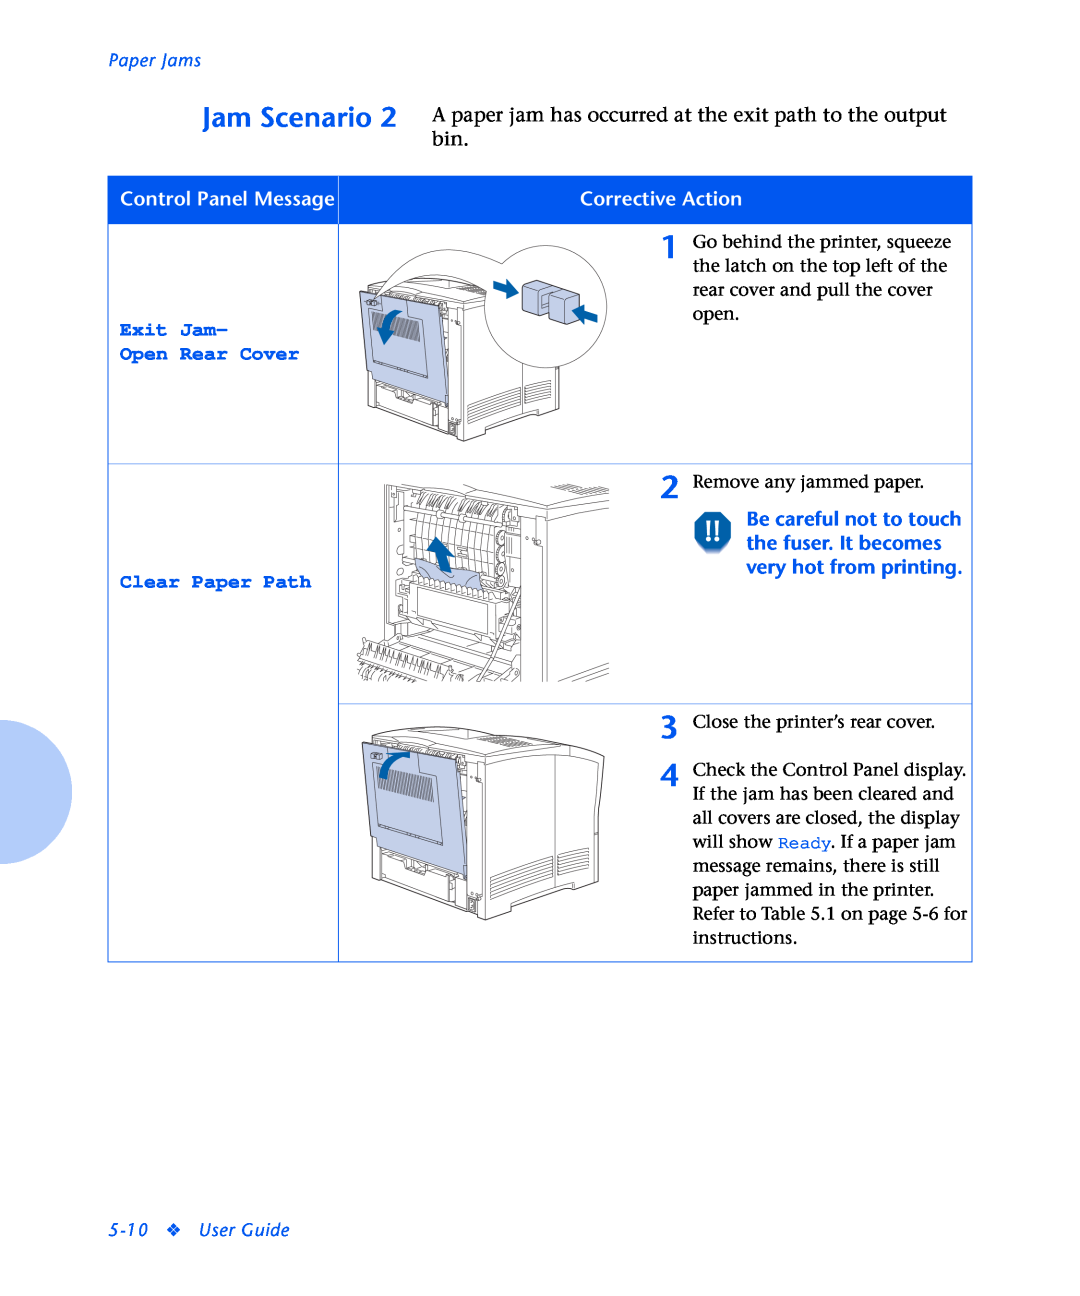 Xerox N2125 Be careful not to touch the fuser. It becomes very hot from printing, Jam Scenario, Paper Jams, User Guide 